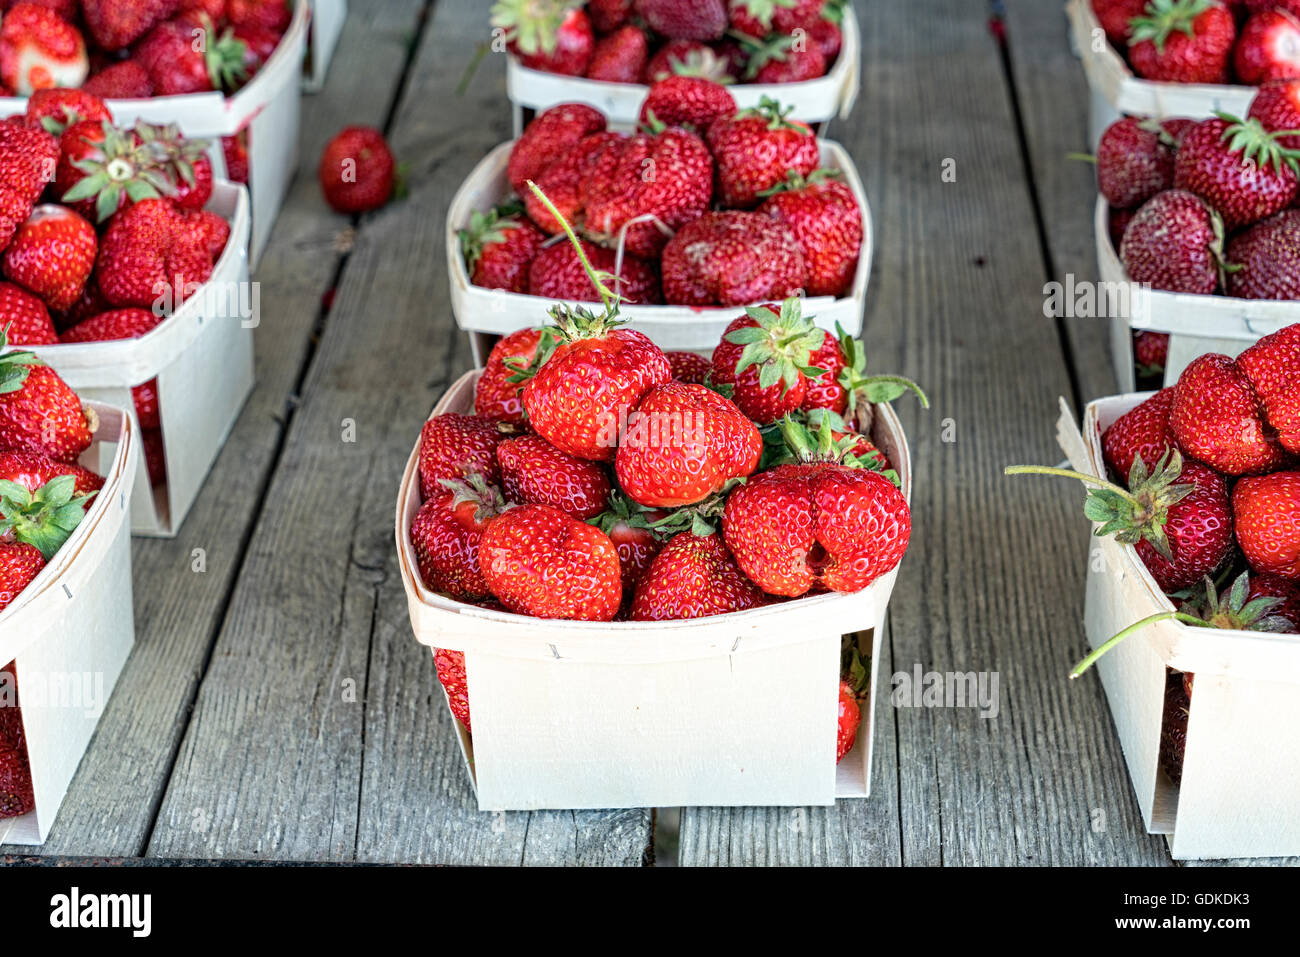 Cartons of Freshly Picked, Ripe, Red Strawberries.  Displayed on an weathered wooden table and offered for sale at a Strawberry Stock Photo